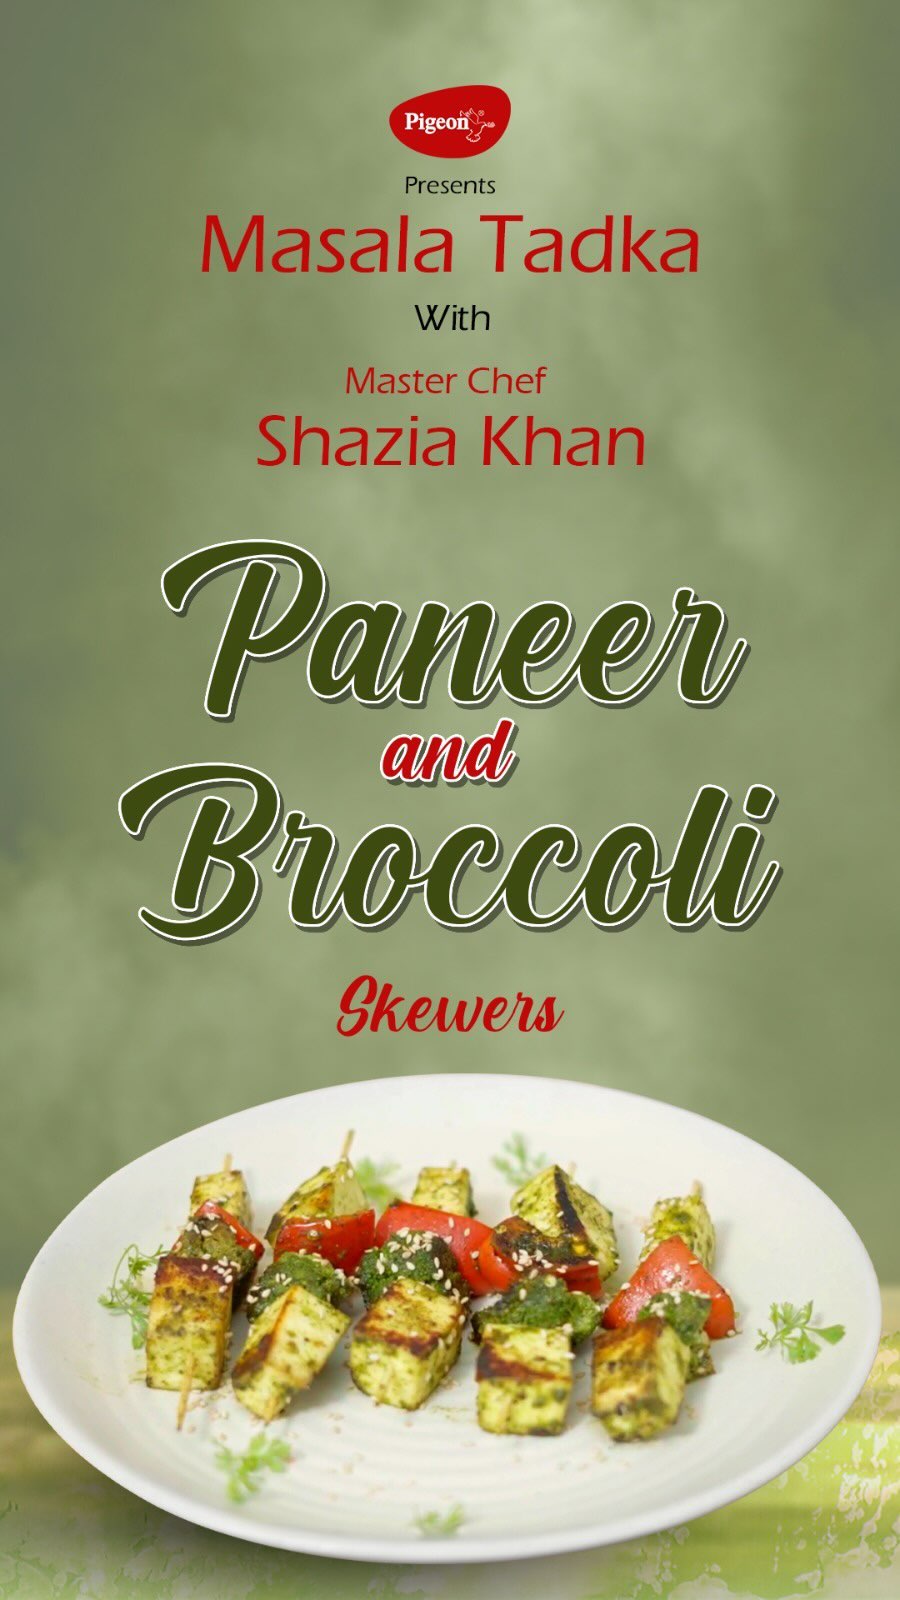 Paneer & Broccoli Skewers by MasterChef Shazia Khan!
Get ready for a burst of flavor with these delicious and healthy pa...